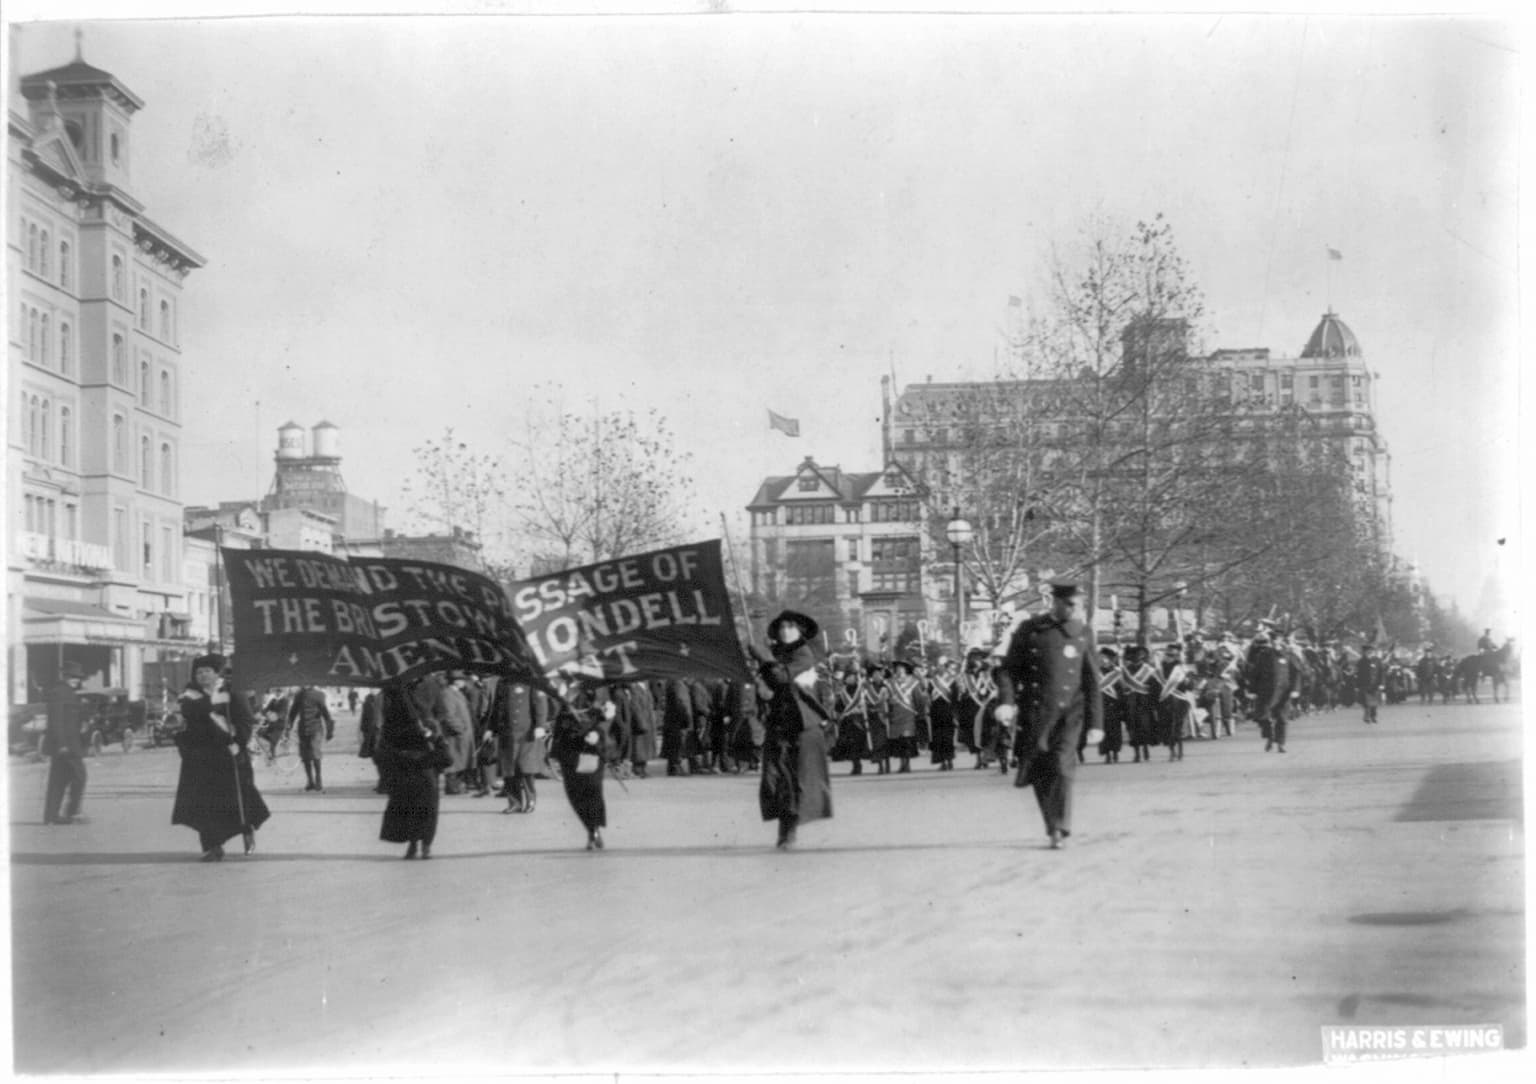 In this photo provided by the Library of Congress, taken in 1913, four women march ahead of large procession with the banner "We demand the passage of the Bristow-Mondell amendment" at the woman suffrage parade in Washington. (AP)